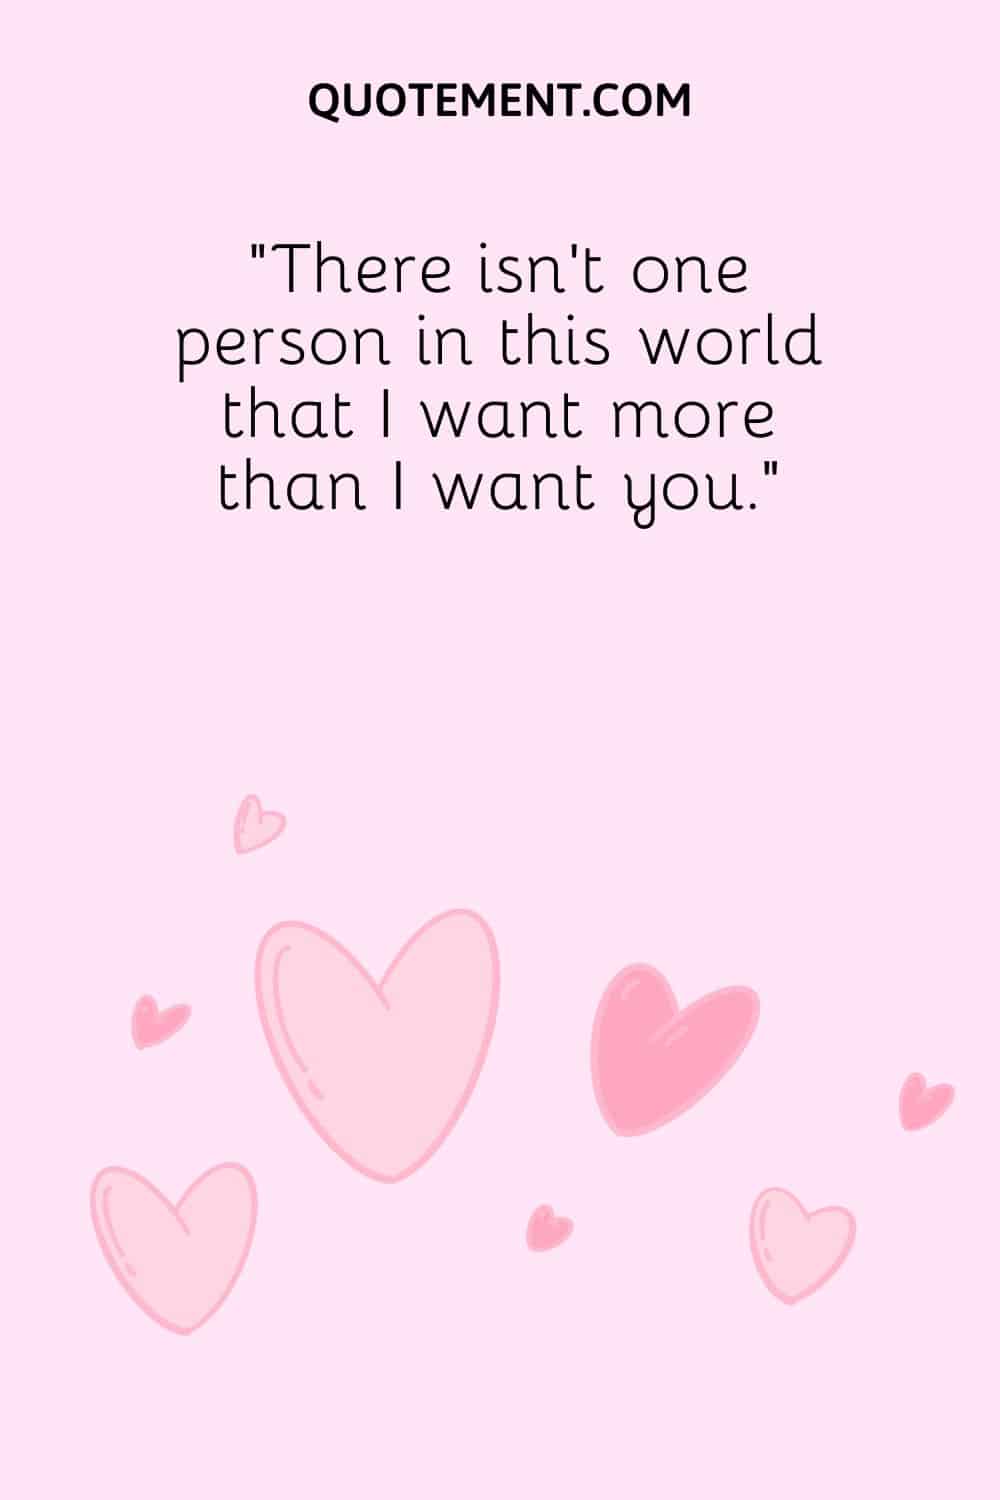 “There isn’t one person in this world that I want more than I want you.”